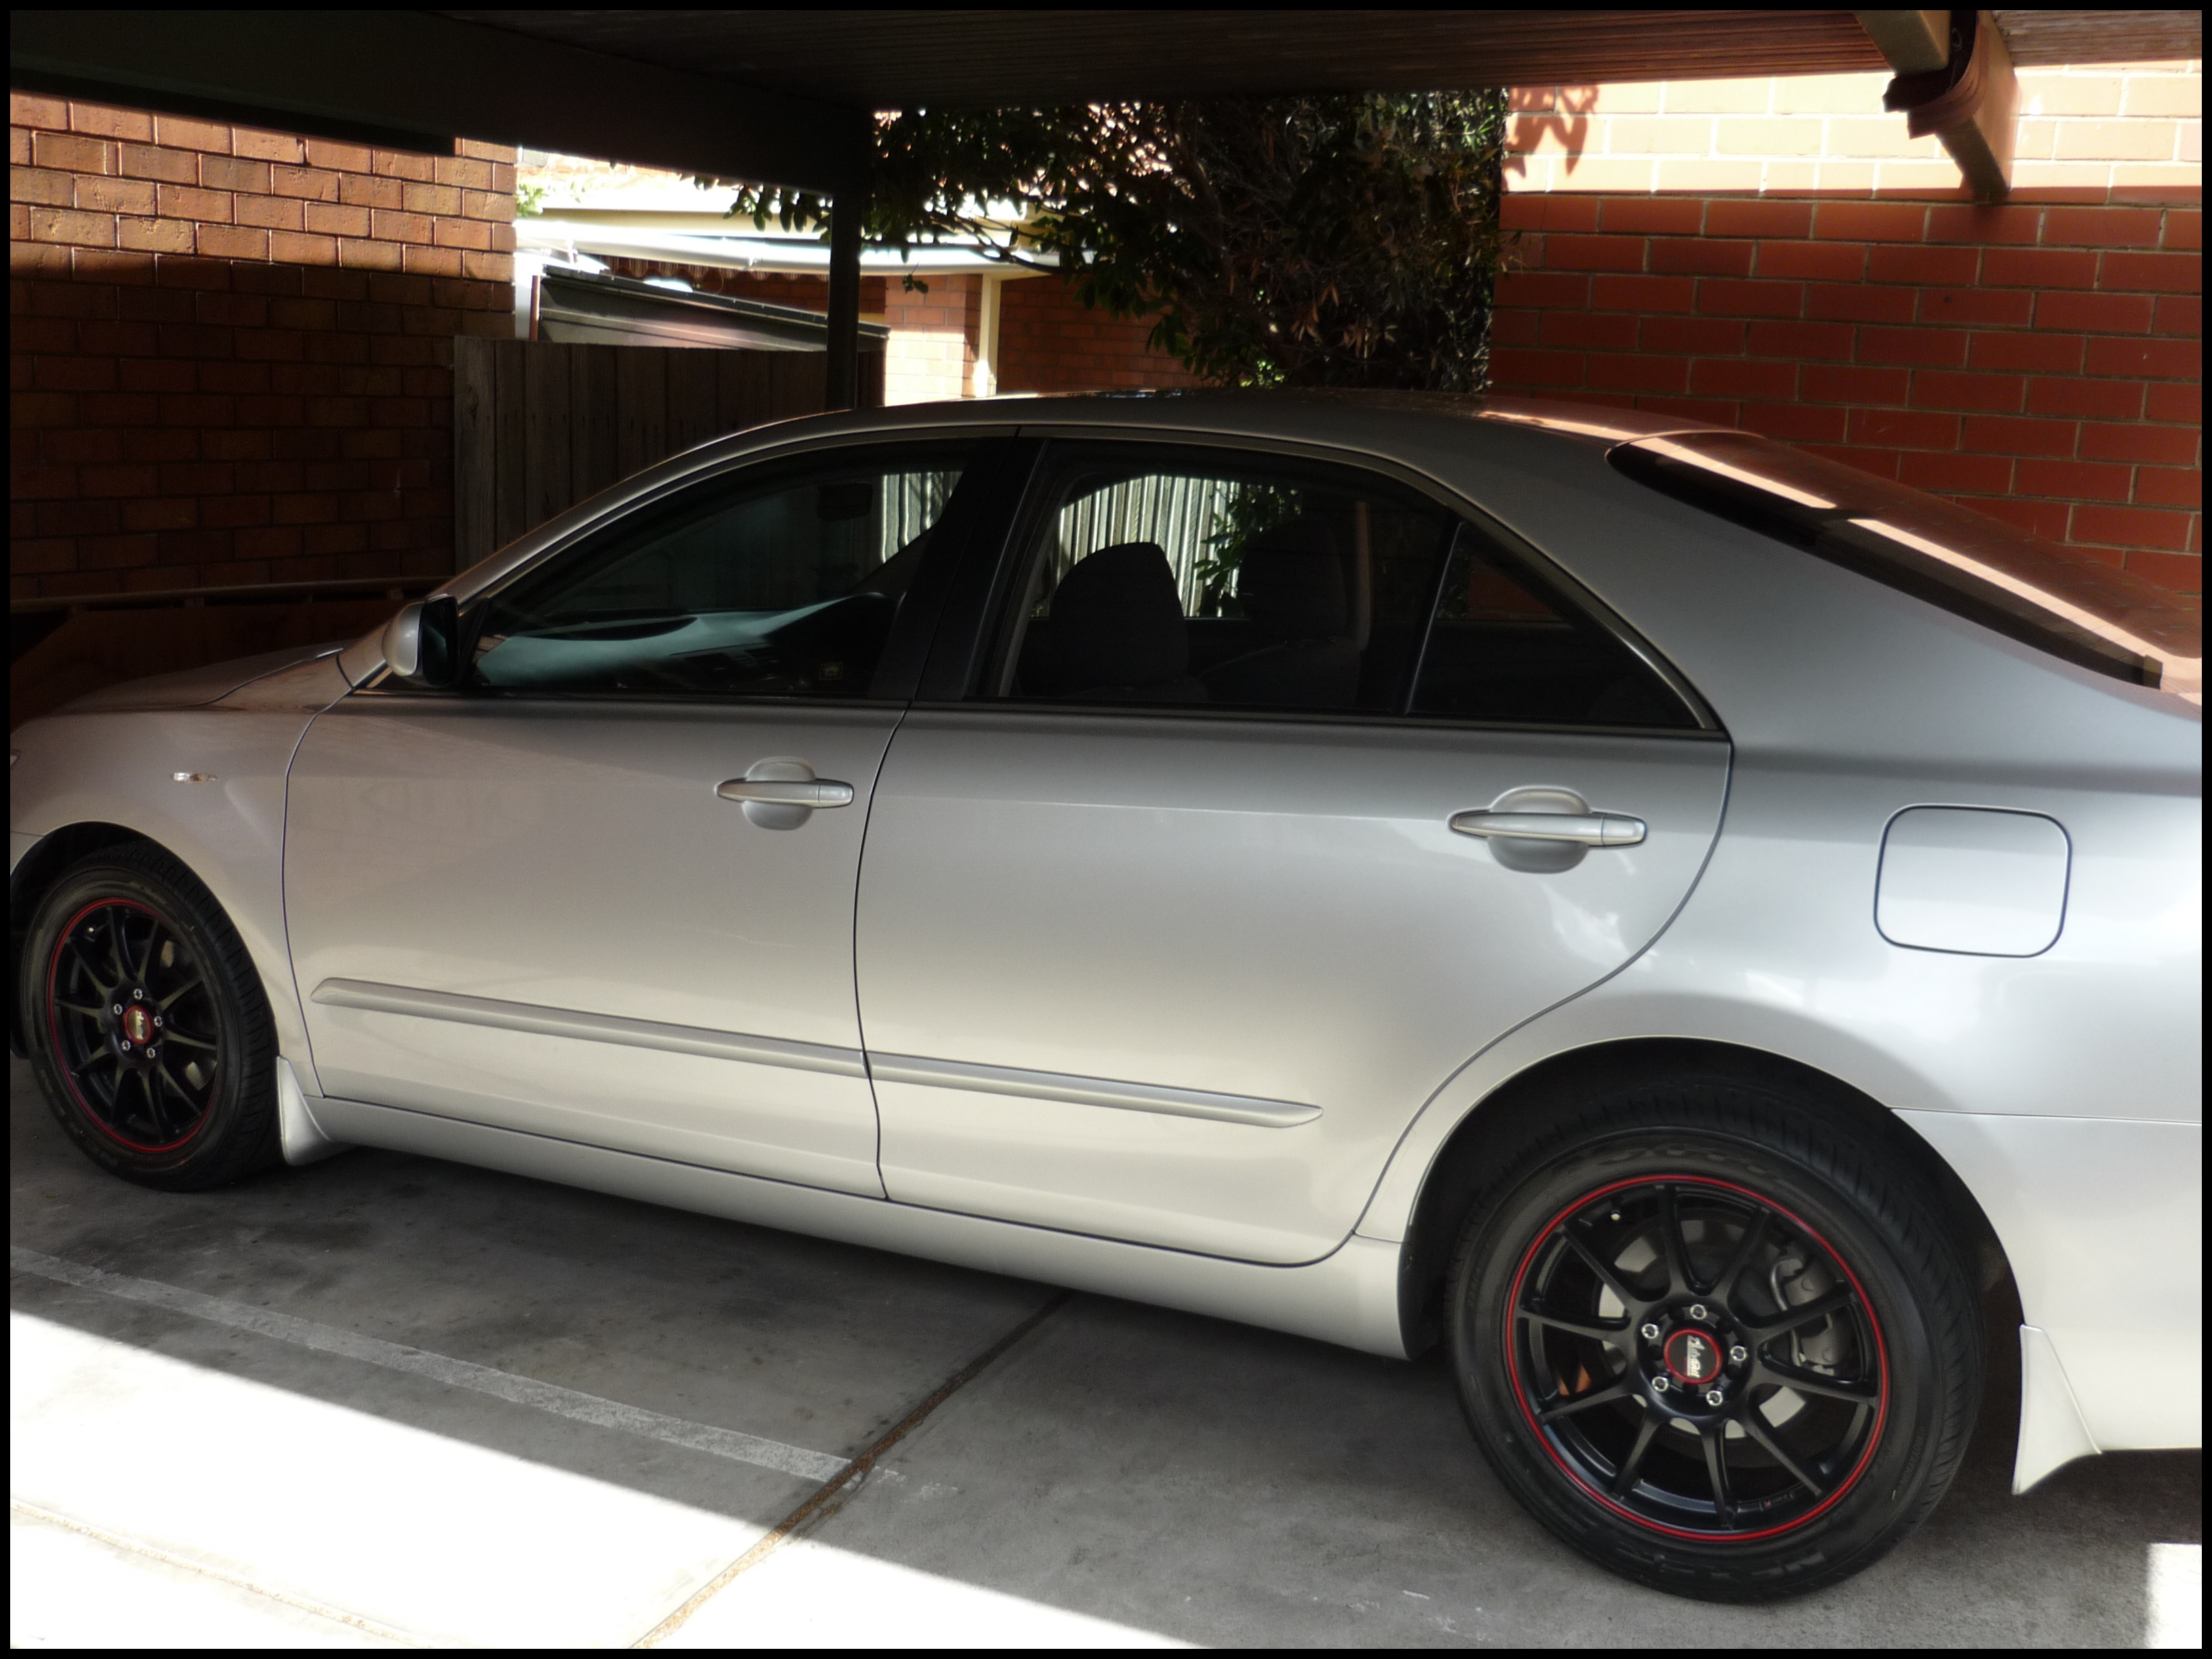 2007 toyota Camry Tires Saabted 2007 toyota Camry Specs s Modification Info at Cardomain